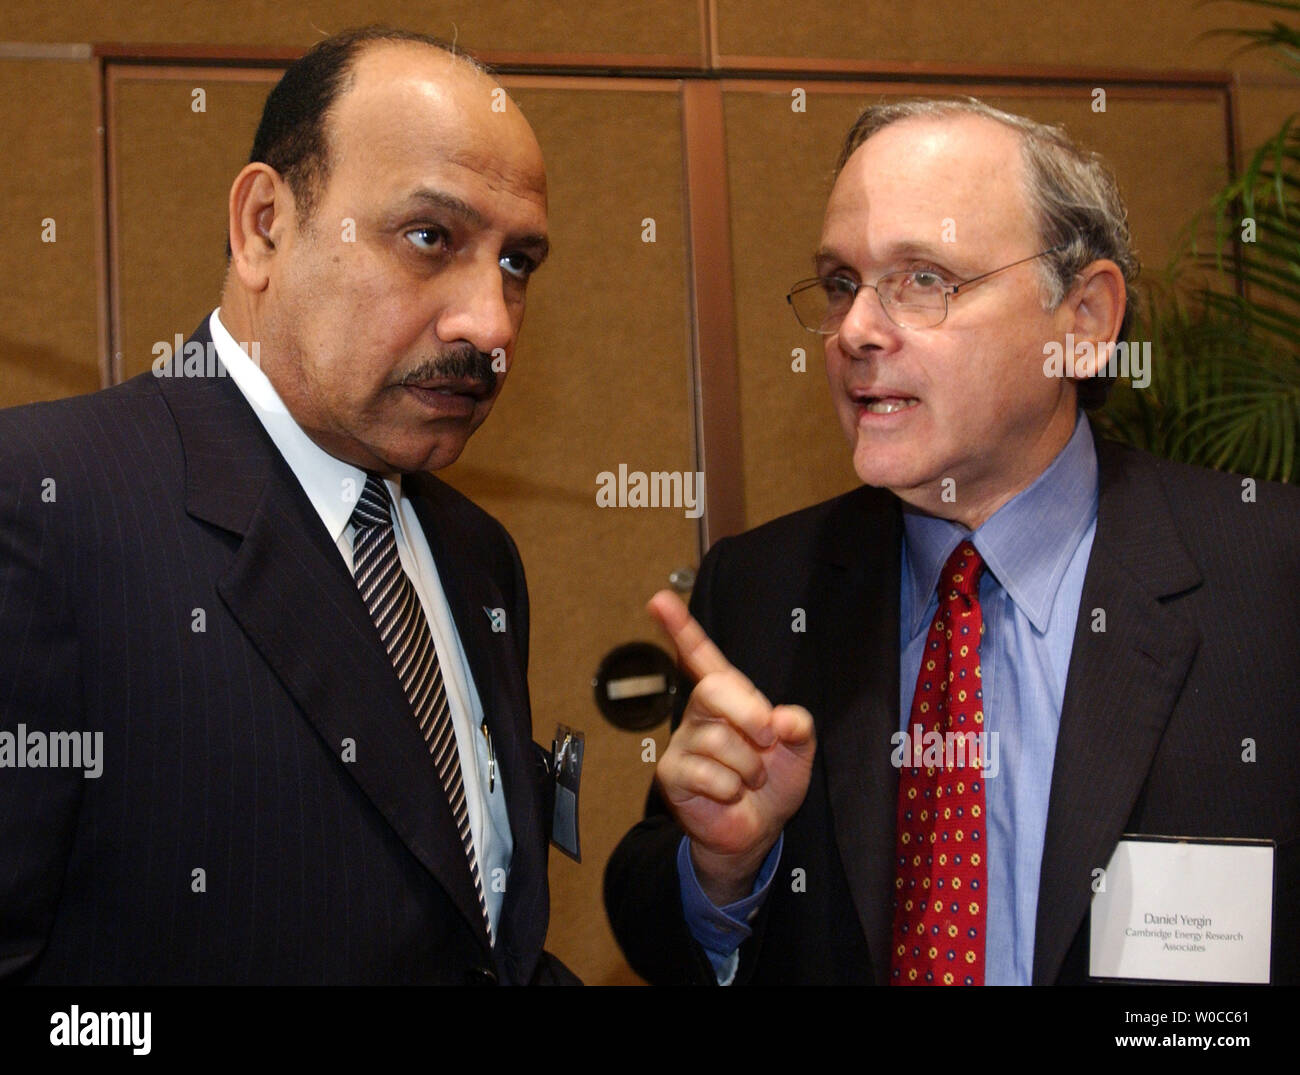 Abdallah Jum'ah, CEO of Saudi Aramco, left, speaks with Daniel Yergin, Chairman of the Cambridge Energy Research Assoc., during a conference on the United States and Saudi Arabia relationship and their interests in energy security, on April 27, 2004 in Washington.  The conference was sponsored by CSIS and dealt with oil reserves, production, prices and security. (UPI Photo/Michael Kleinfeld) Stock Photo